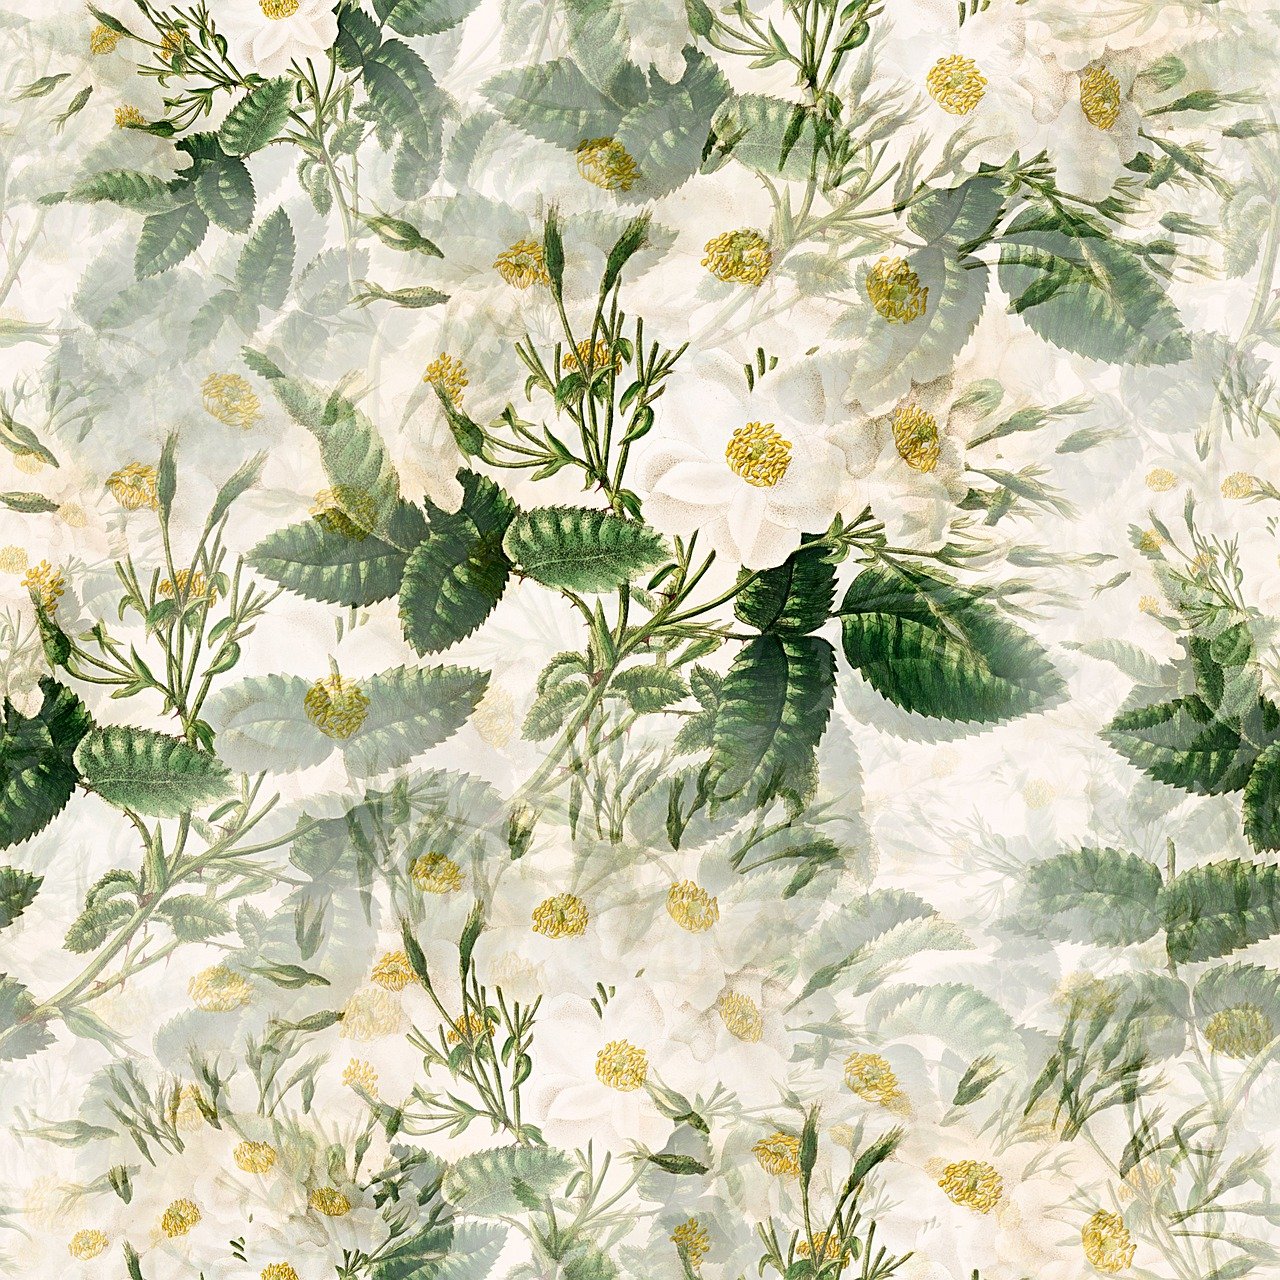 a floral wallpaper with white flowers and green leaves, a digital rendering, inspired by Louisa Chase, tumblr, multiexposure, buttercups, nineteenth century, dmitry mazurkevich